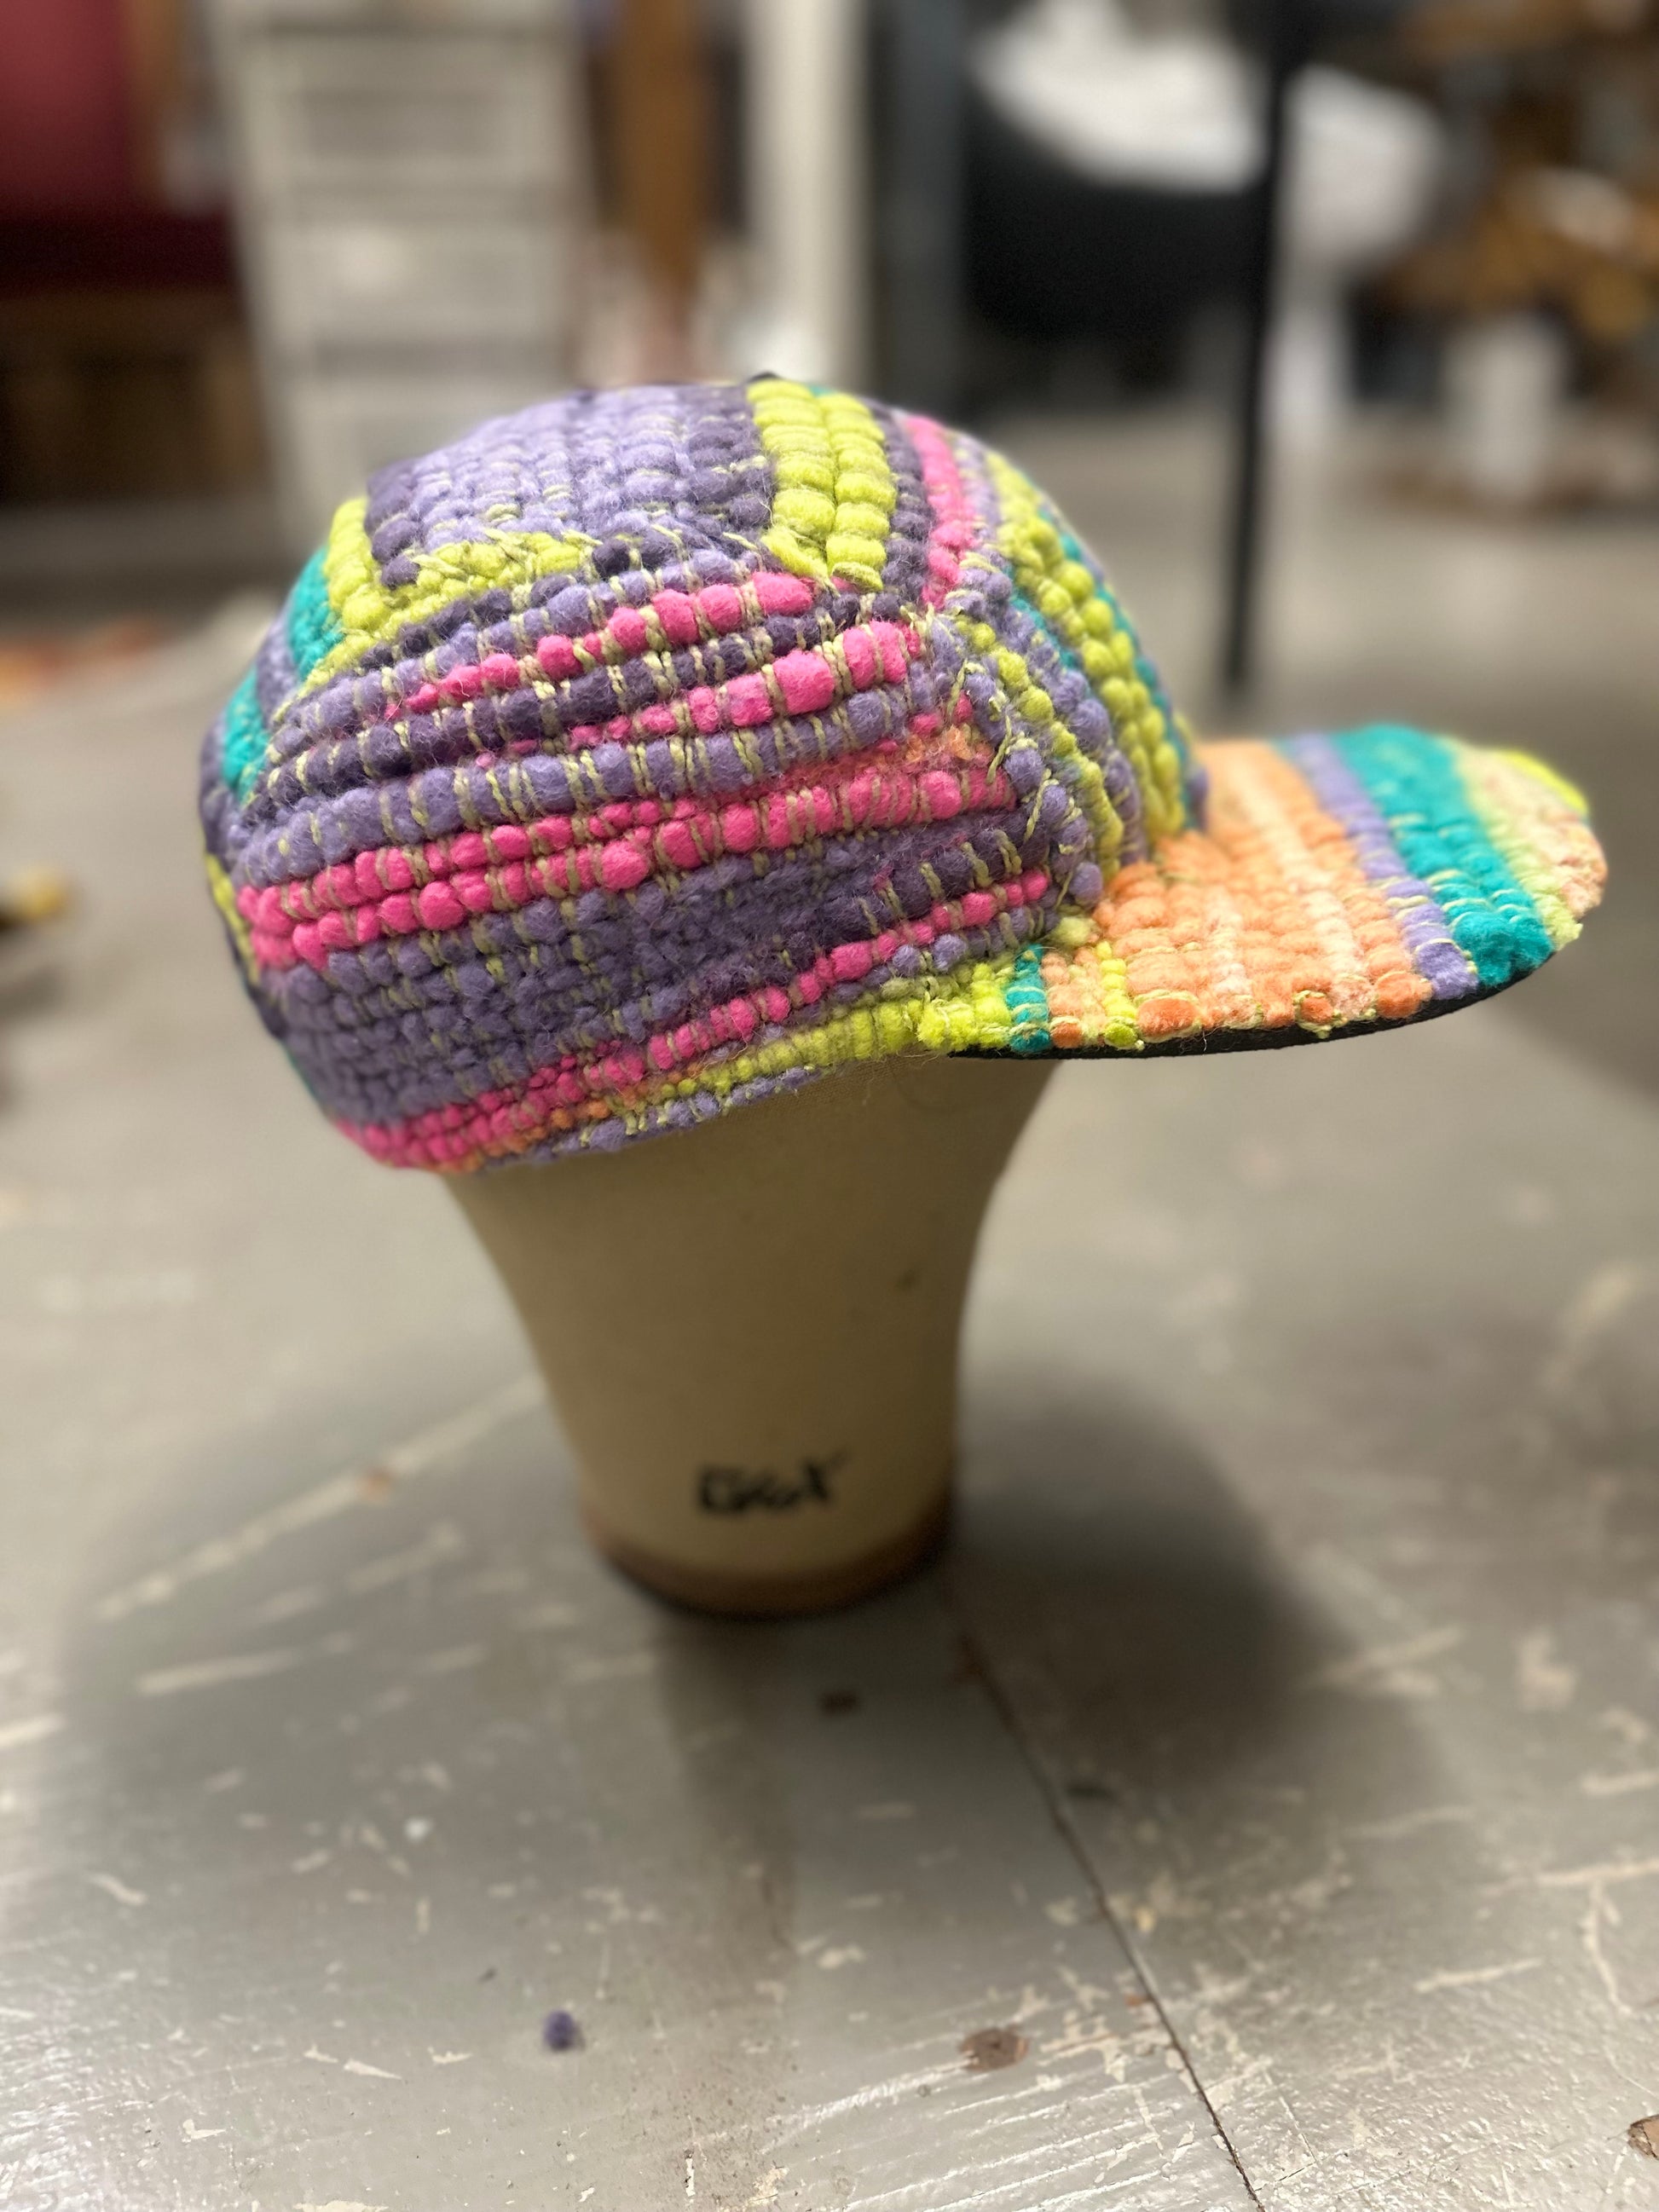 Woven 5 panel hat created using merino wool that is colorful. Neon pink, green, purple, orange and yellow. Product is handwoven and hand stitched. 